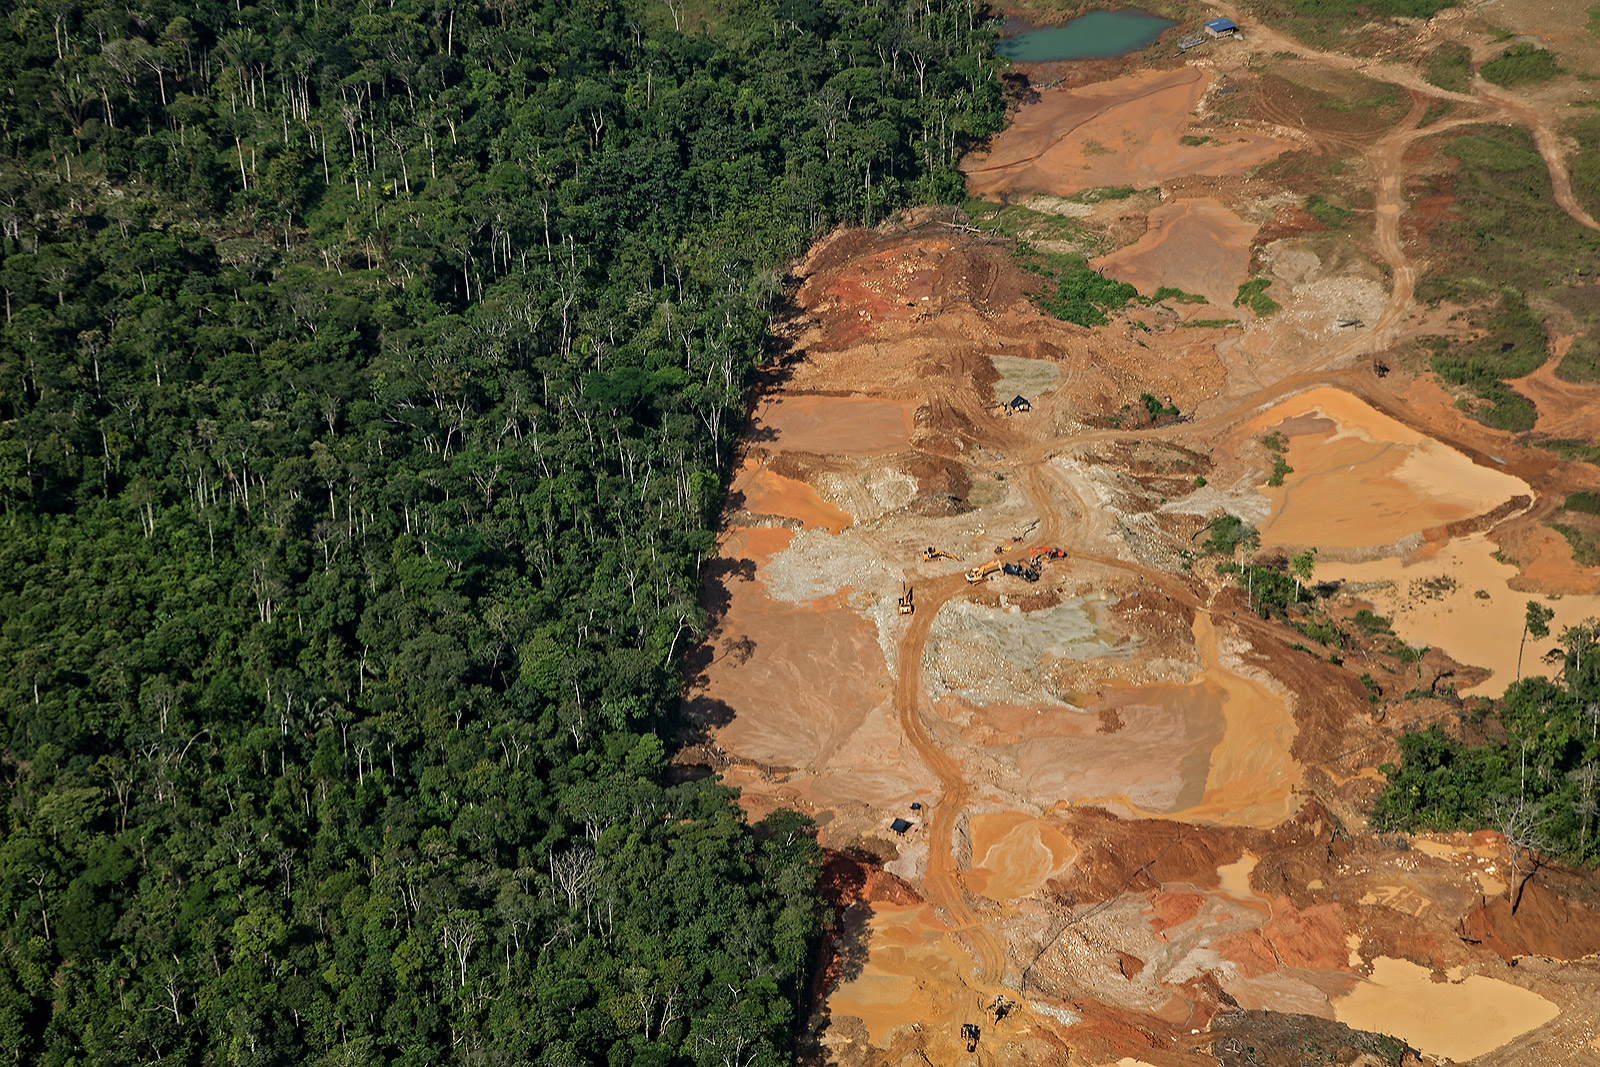 Image showing an illegal gold mining operation in the upper Amazon basin of Ecuador